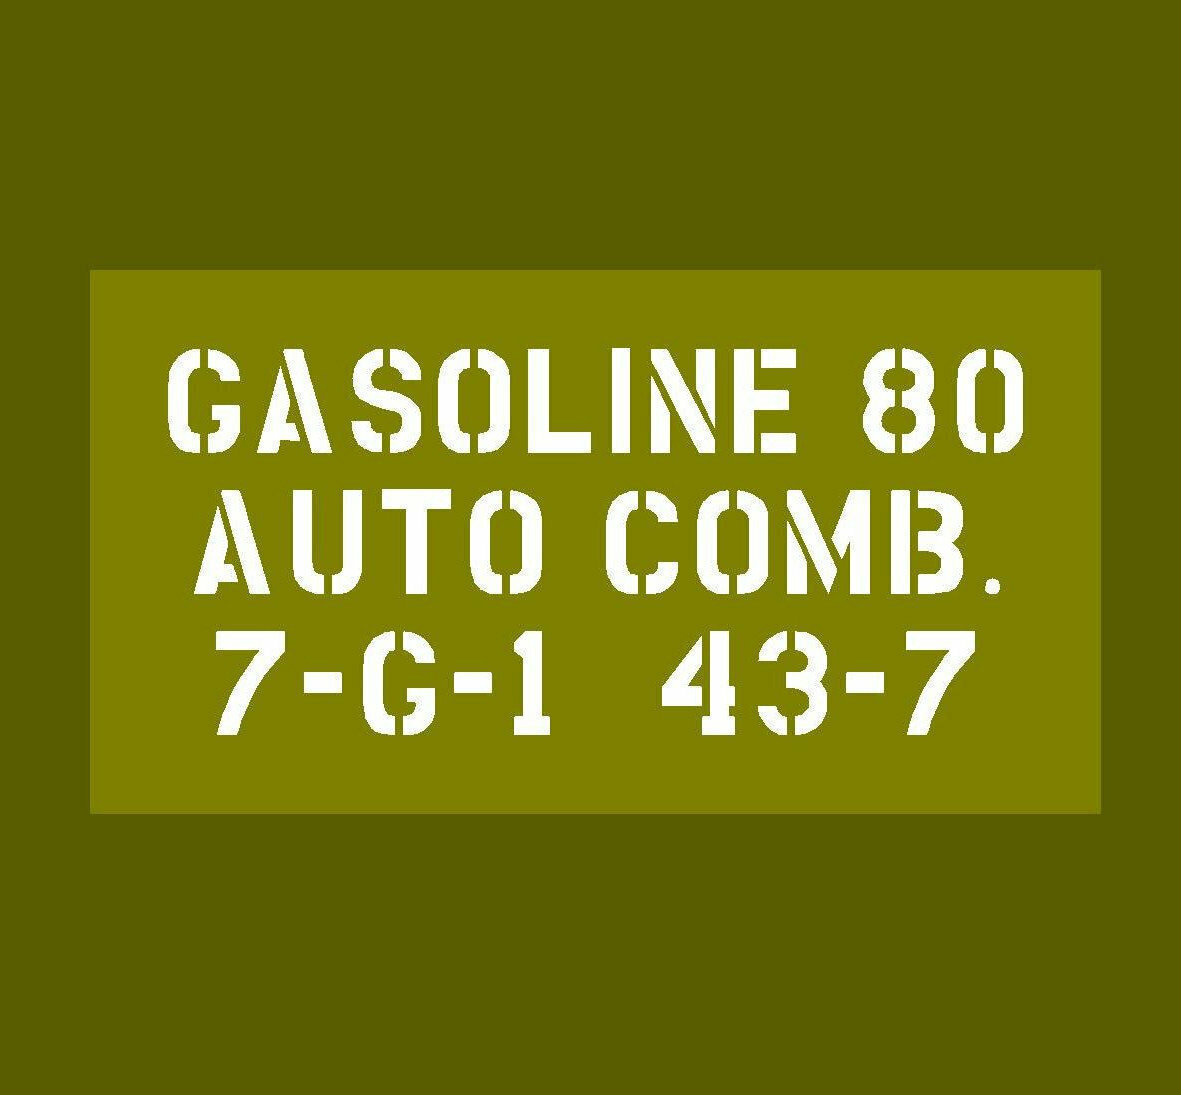 Jerry Can Gasoline 80 stencil Jeep Dodge GMC ww2 prop military vehicle